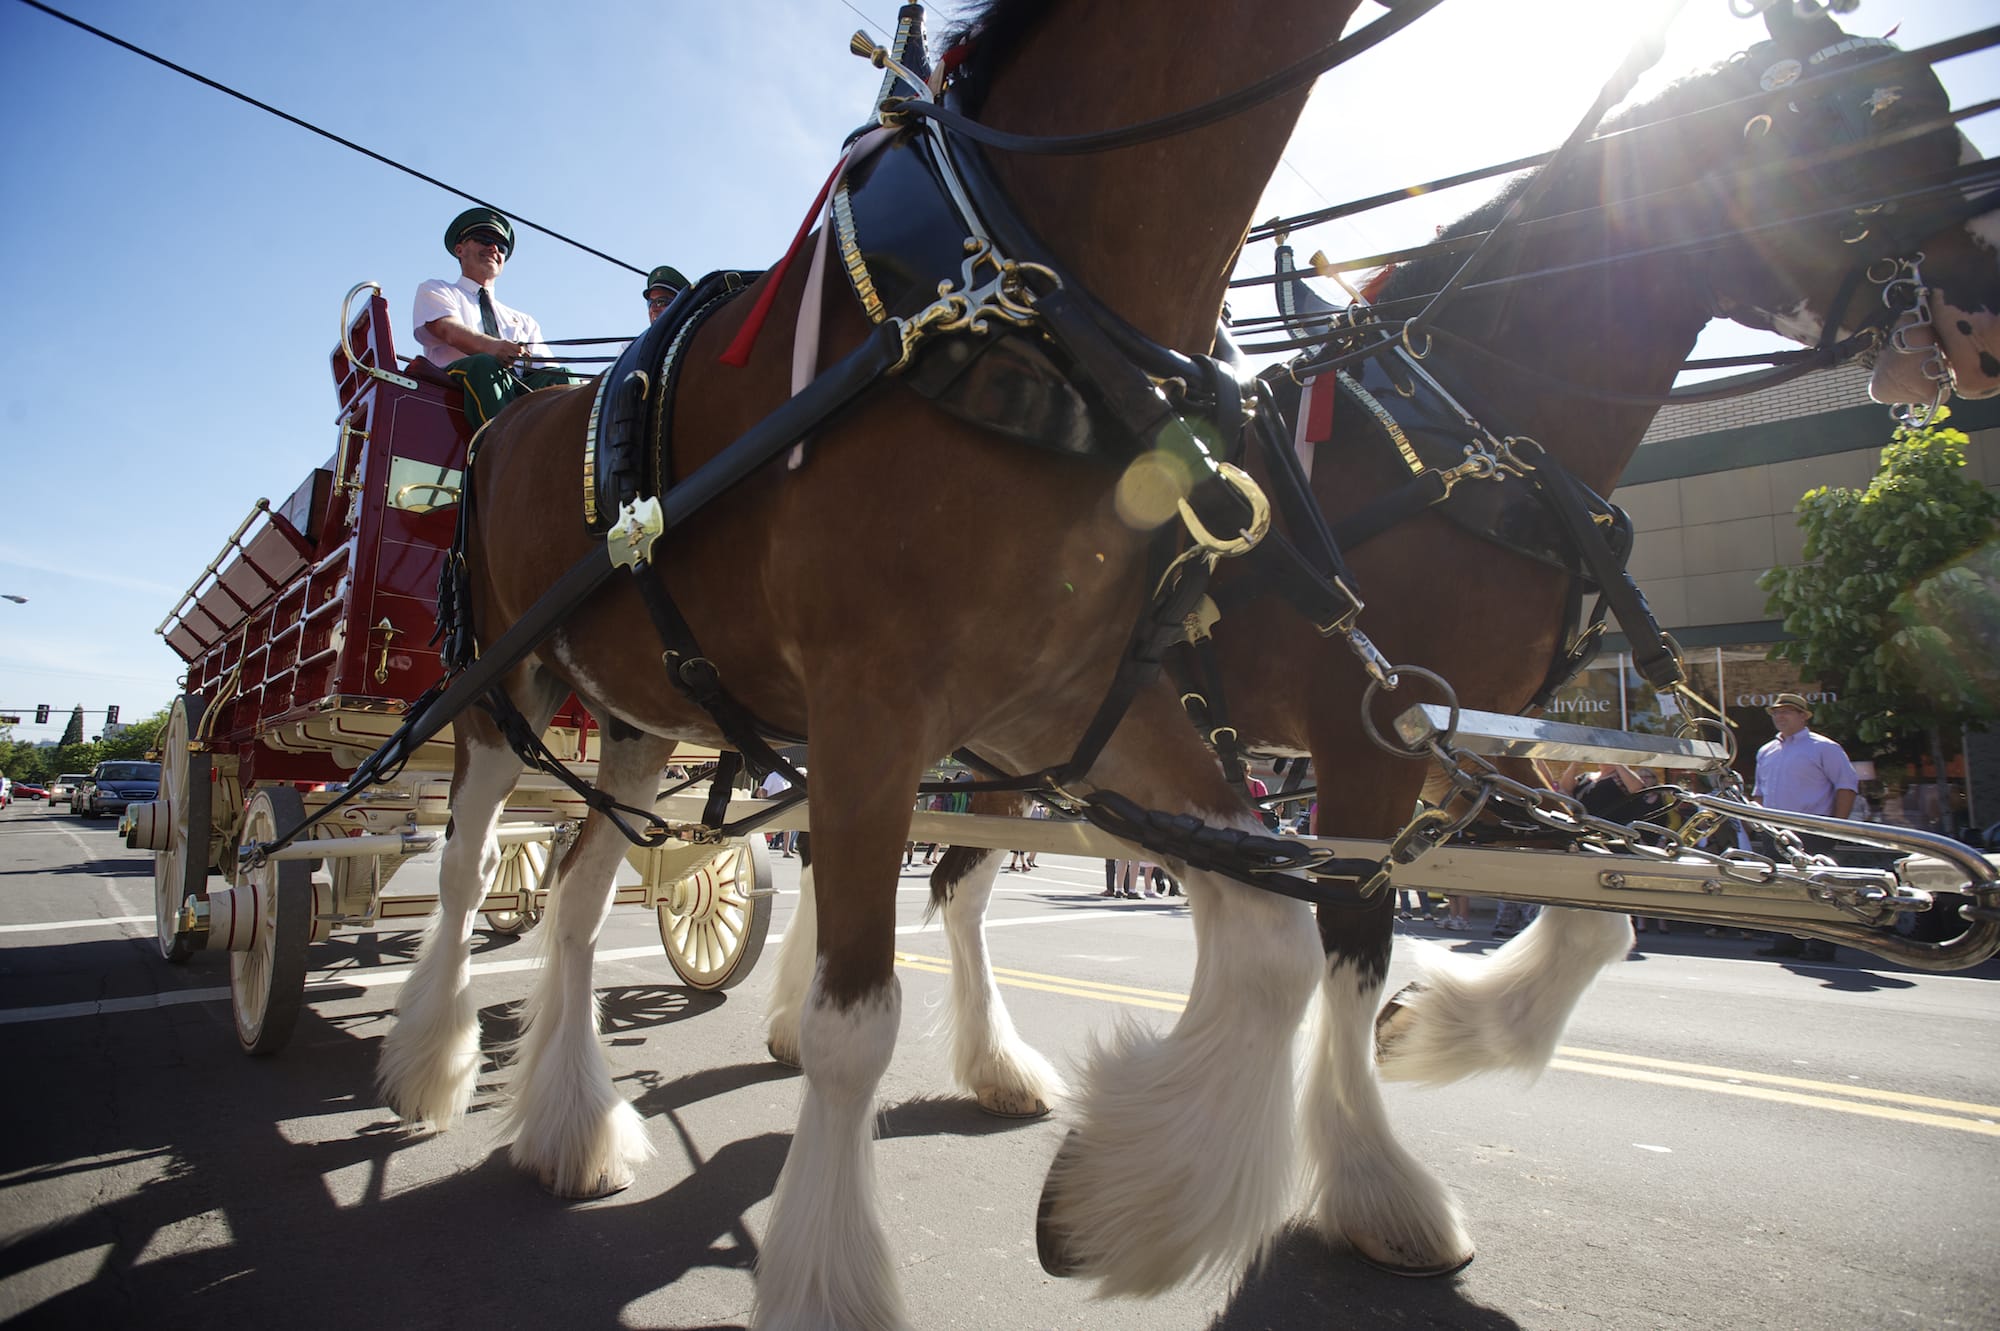 Budweiser's team of Clydesdales clops north on Main Street during a Thursday afternoon appearance in Vancouver. The team, in town for Saturday's Rose Festival Grand Floral Parade, will be on view at the Clark County Event Center at the Fairgrounds from 11 a.m. to 2 p.m. today and 10 a.m. to 12:30 p.m.